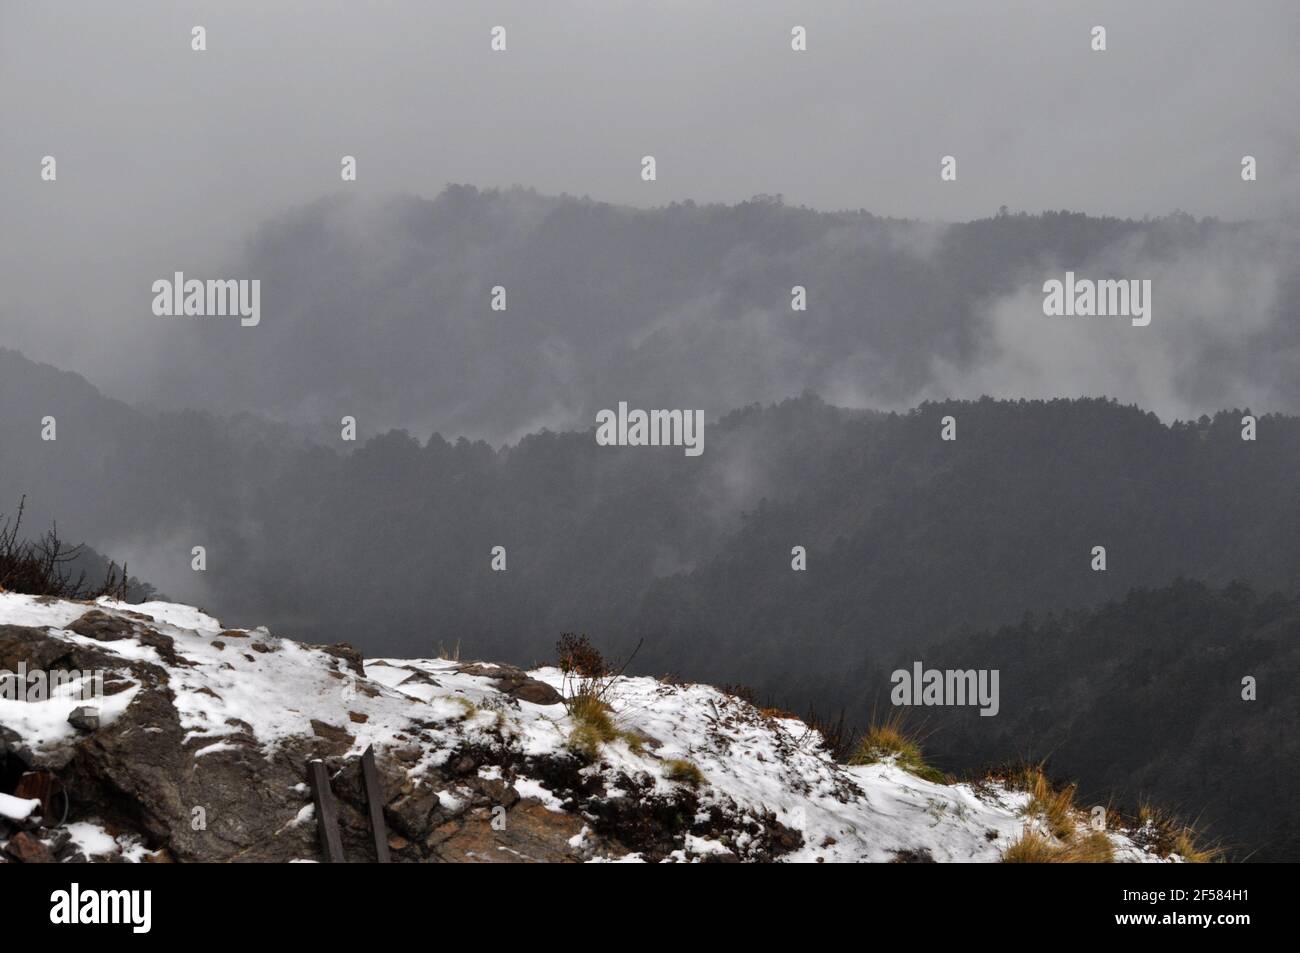 Rows of mountain ridges with silvery mist and cloud , background covered with snow Stock Photo